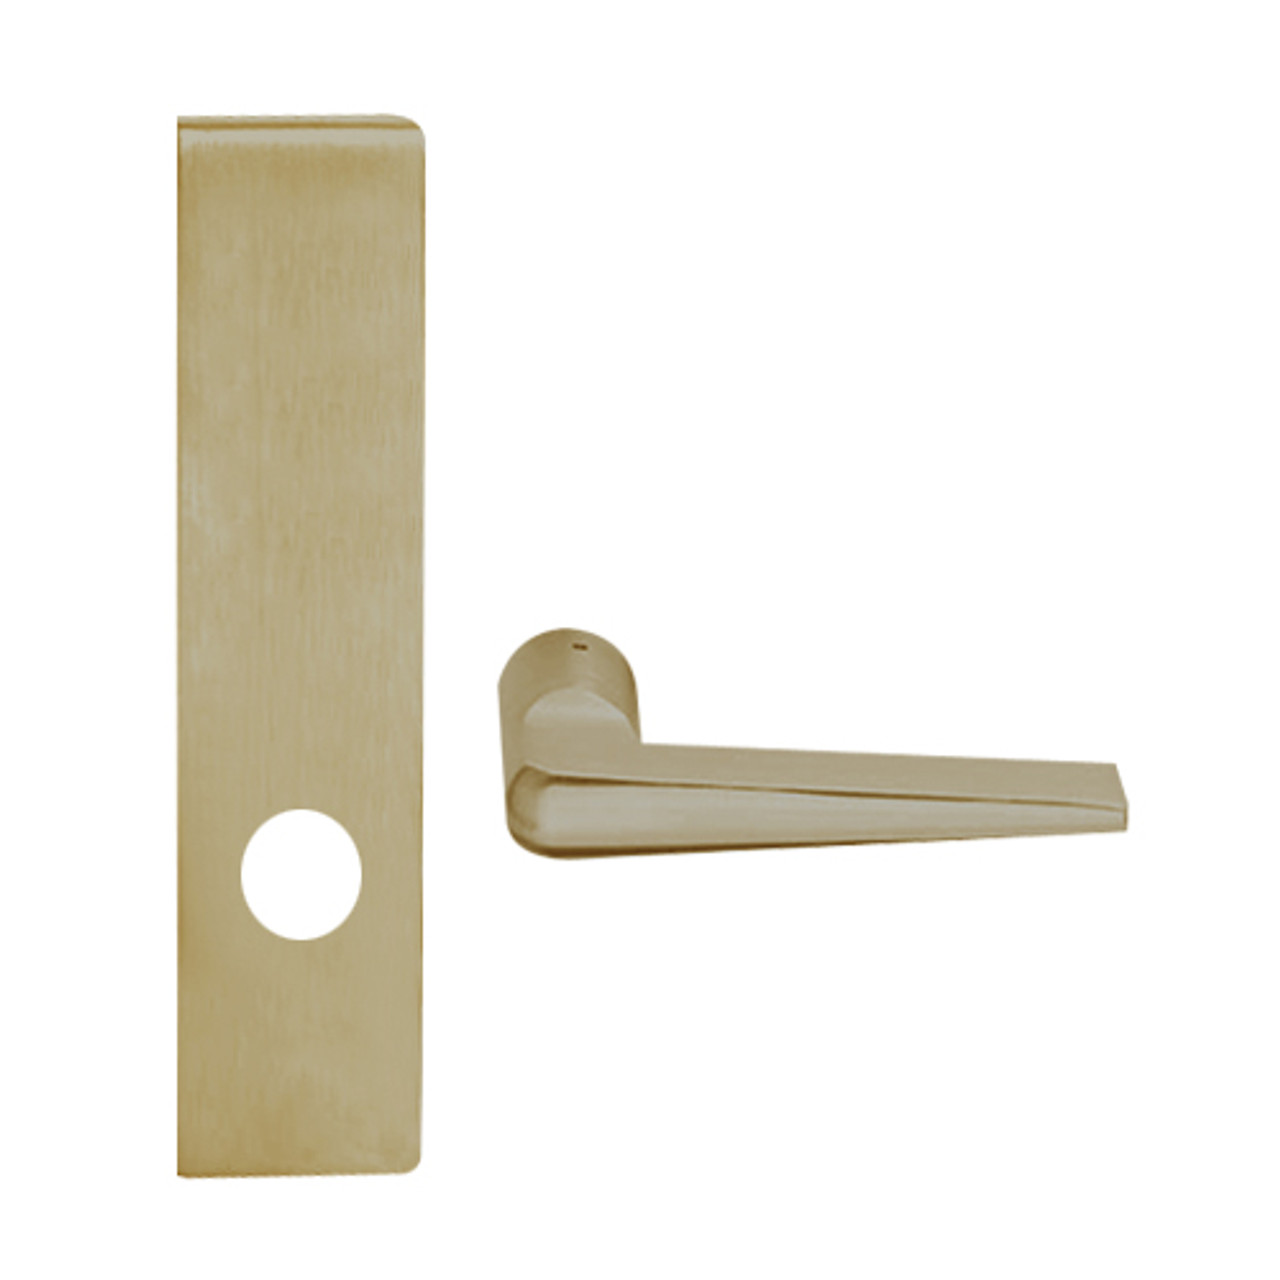 L9440-05L-613 Schlage L Series Privacy with Deadbolt Commercial Mortise Lock with 05 Cast Lever Design in Oil Rubbed Bronze